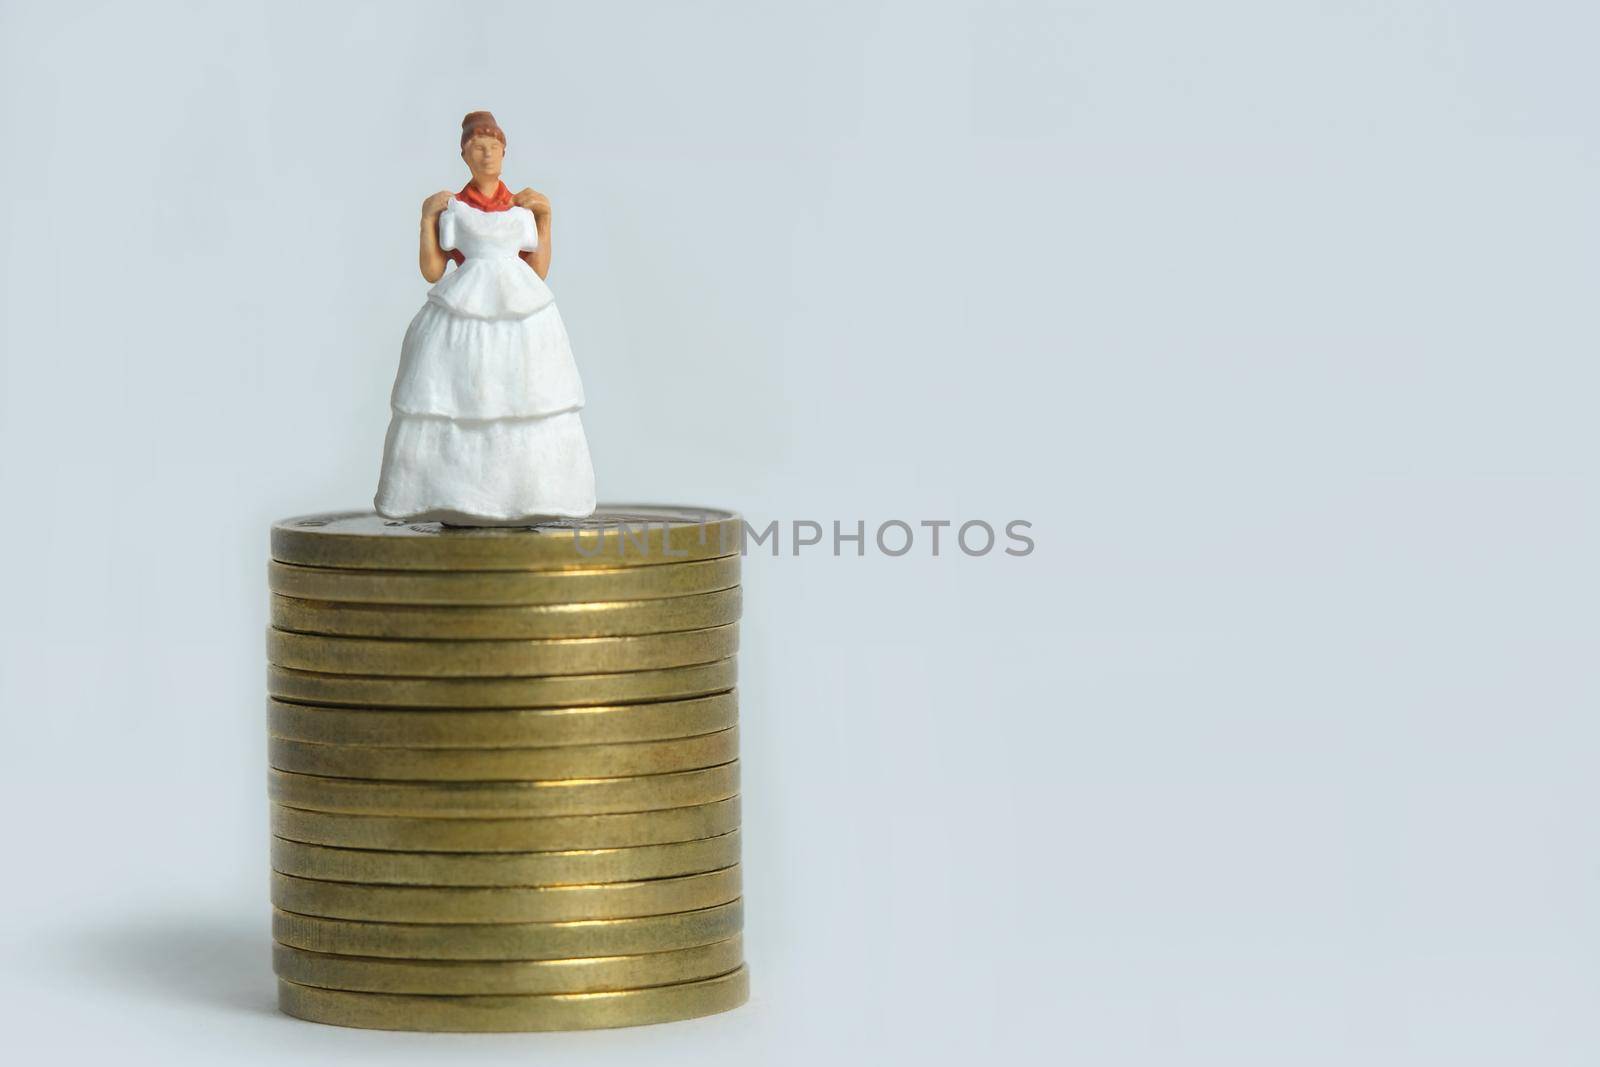 Wedding dress budget for bride, miniature people illustration concept. Woman standing above coin money stack. Image photo